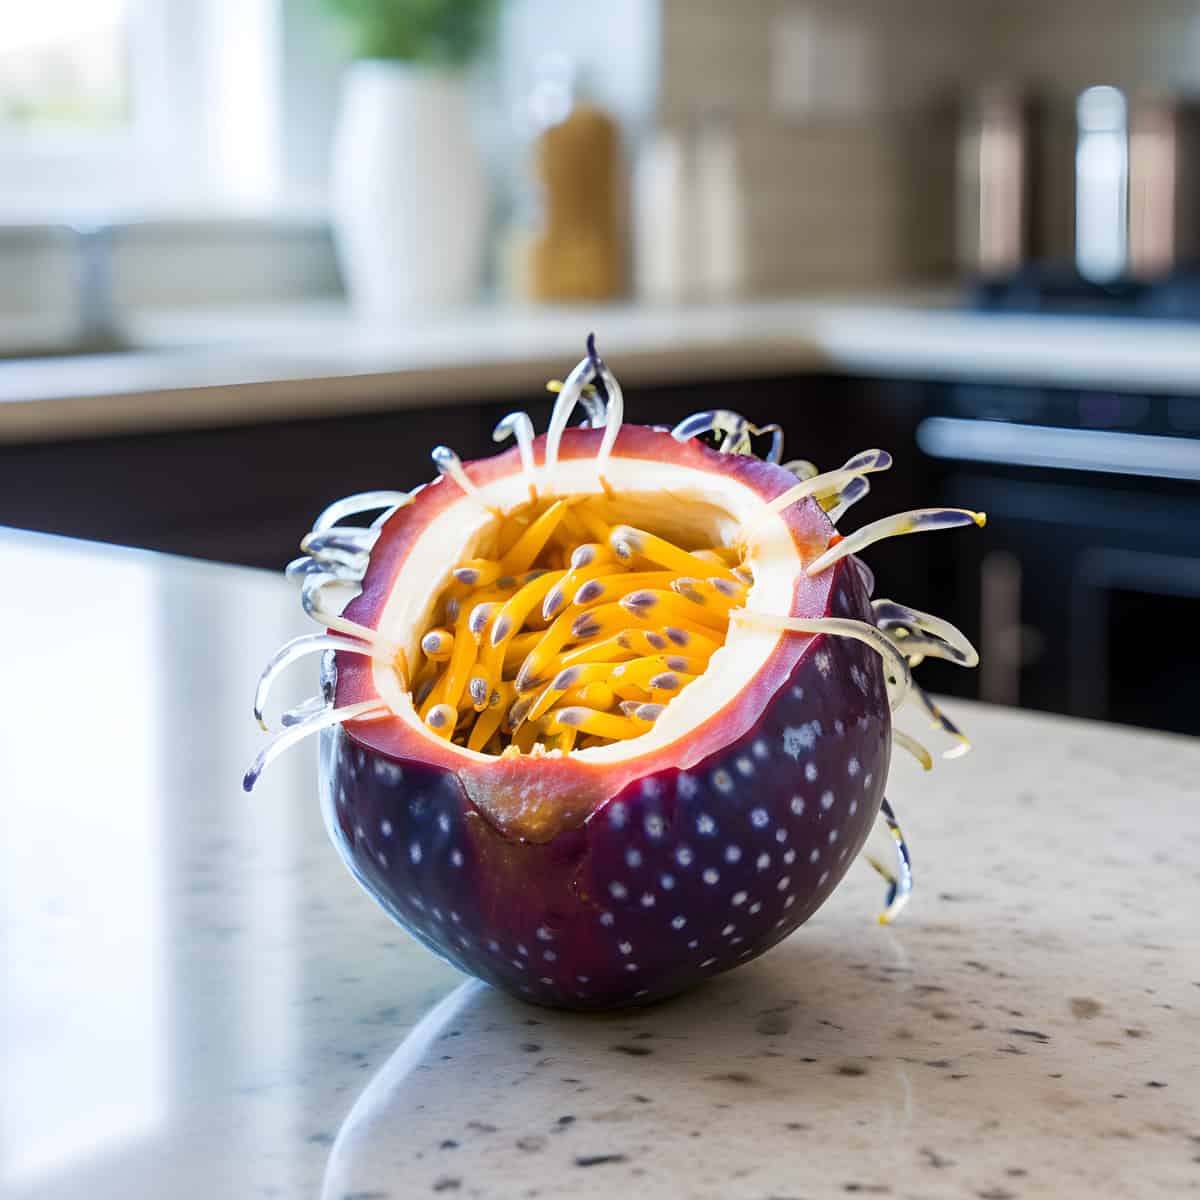 Sea Anemone Passionfruit Fruit on a kitchen counter